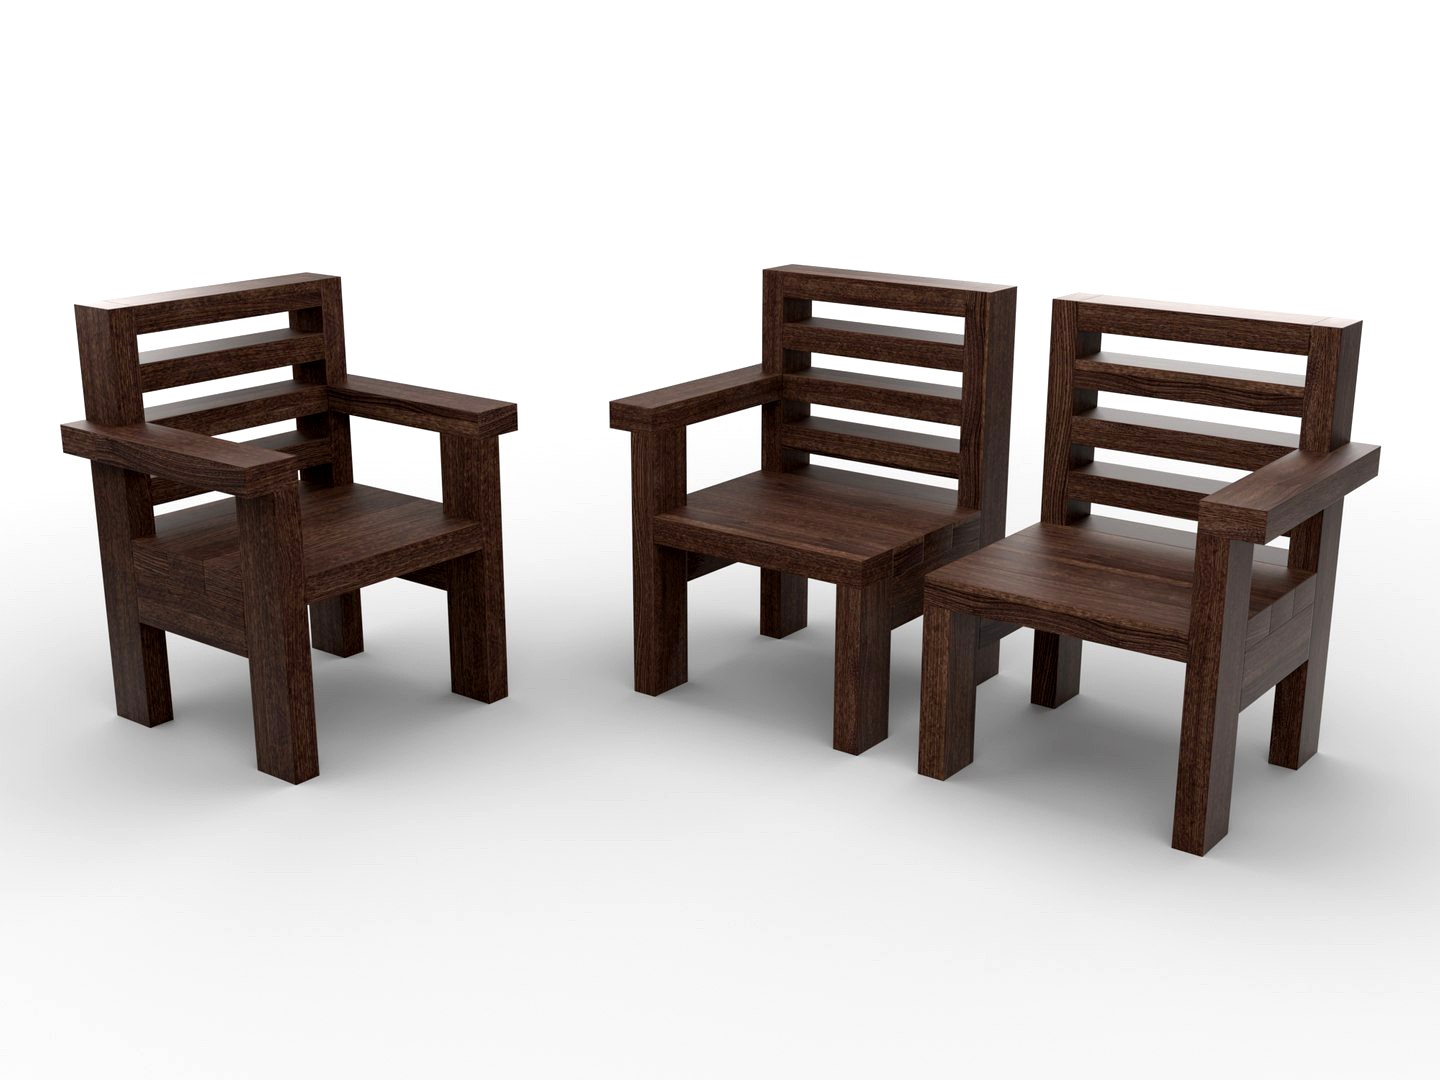 WOODEN BENCH CHAIR